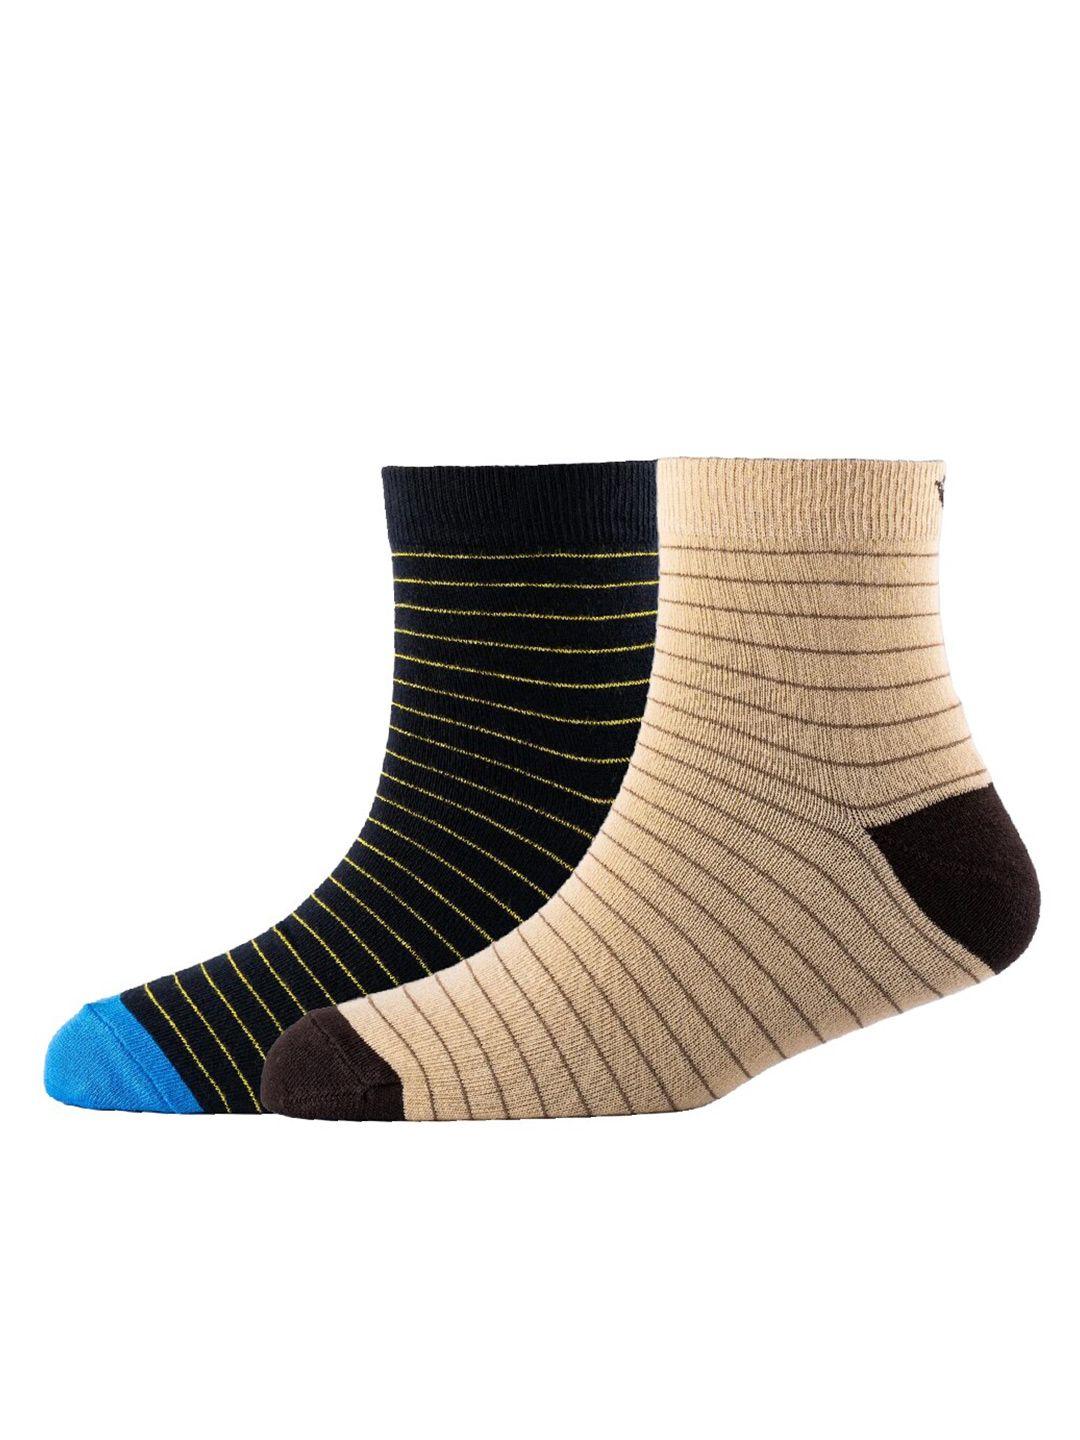 cotstyle men pack of 2 striped cotton ankle length socks